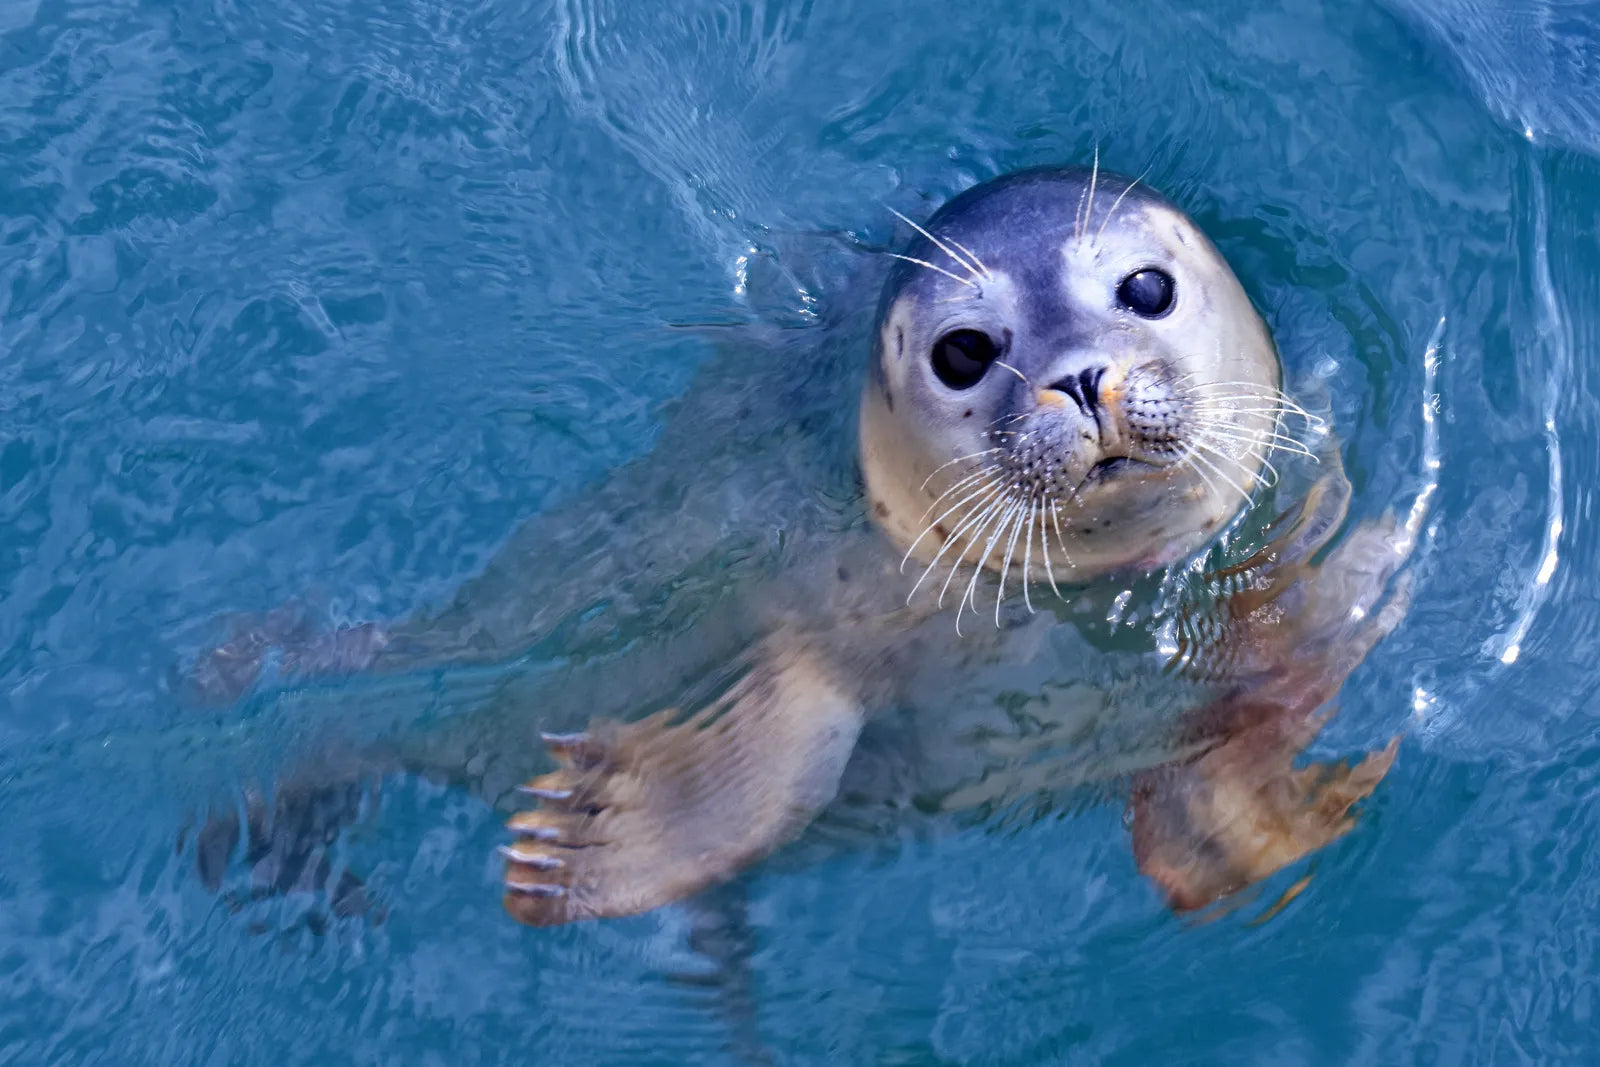 A seal in the water